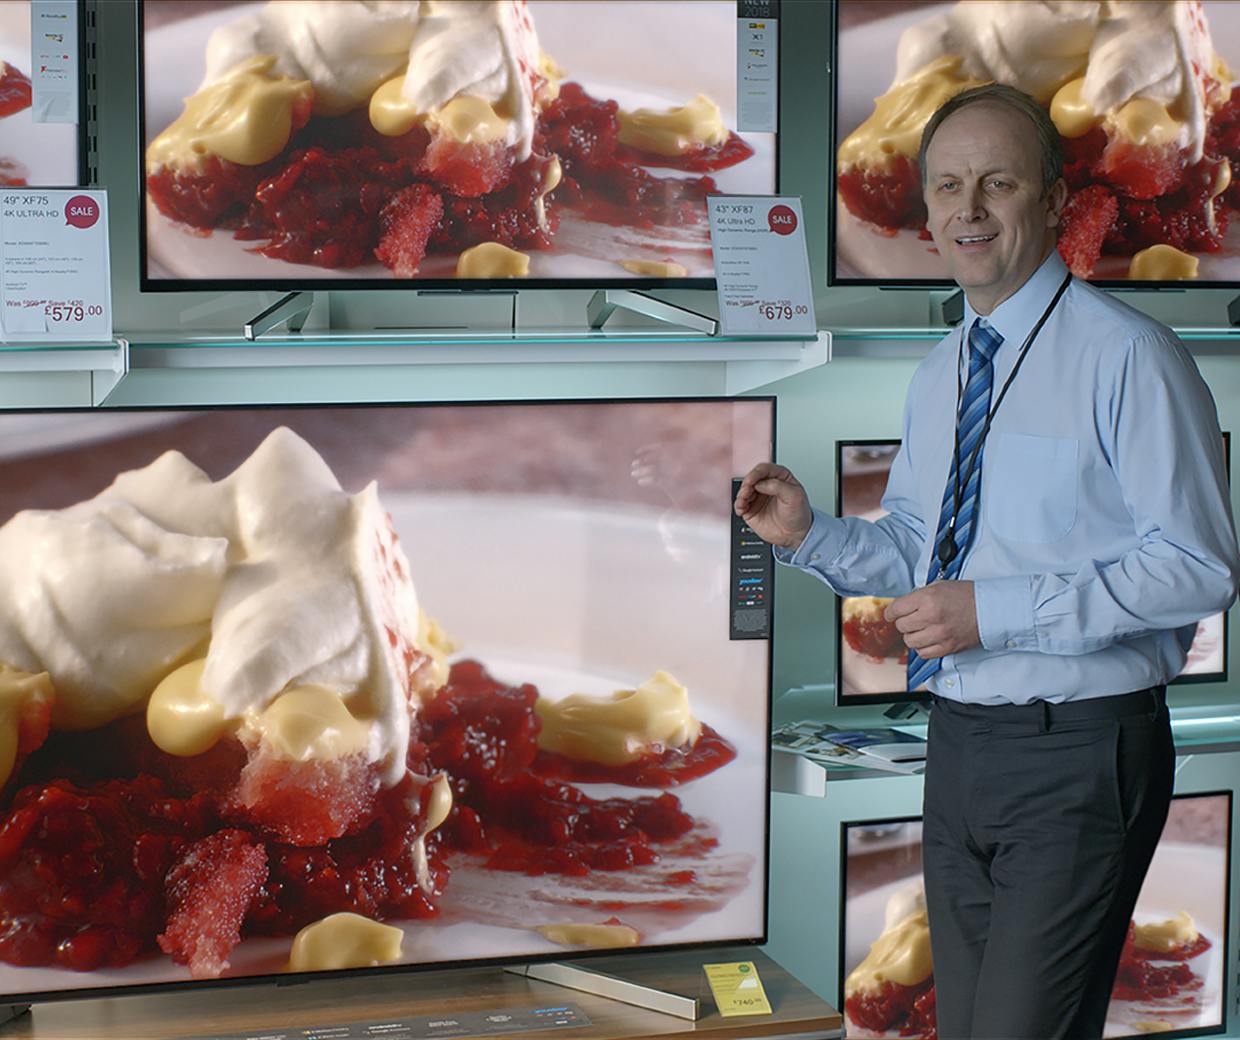 M&S 'This is not just food' campaign trifle